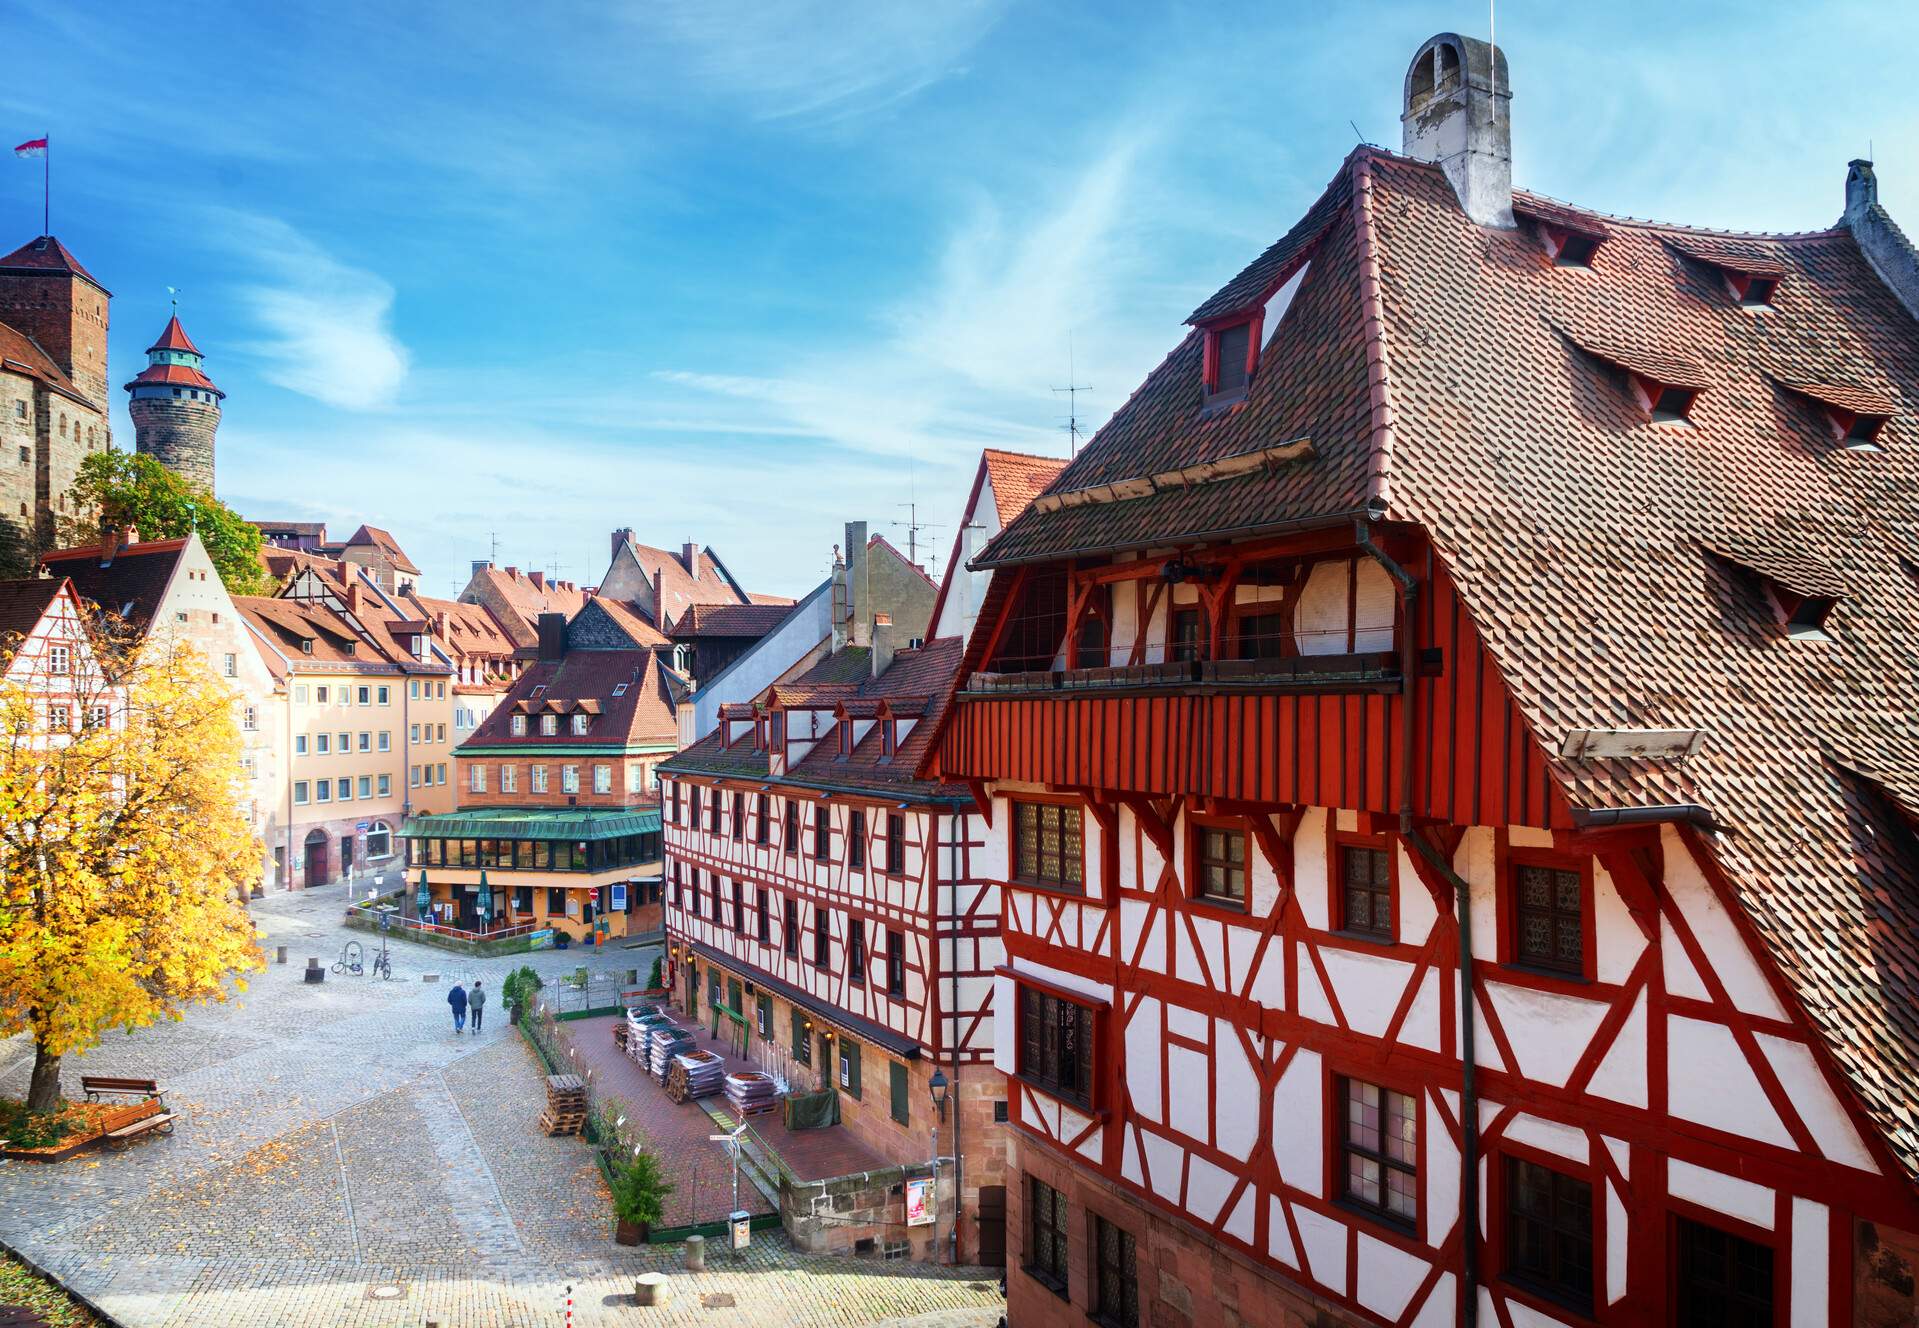 Two men walk on the cobbled street alongside lined tall colourful half-timbered buildings.